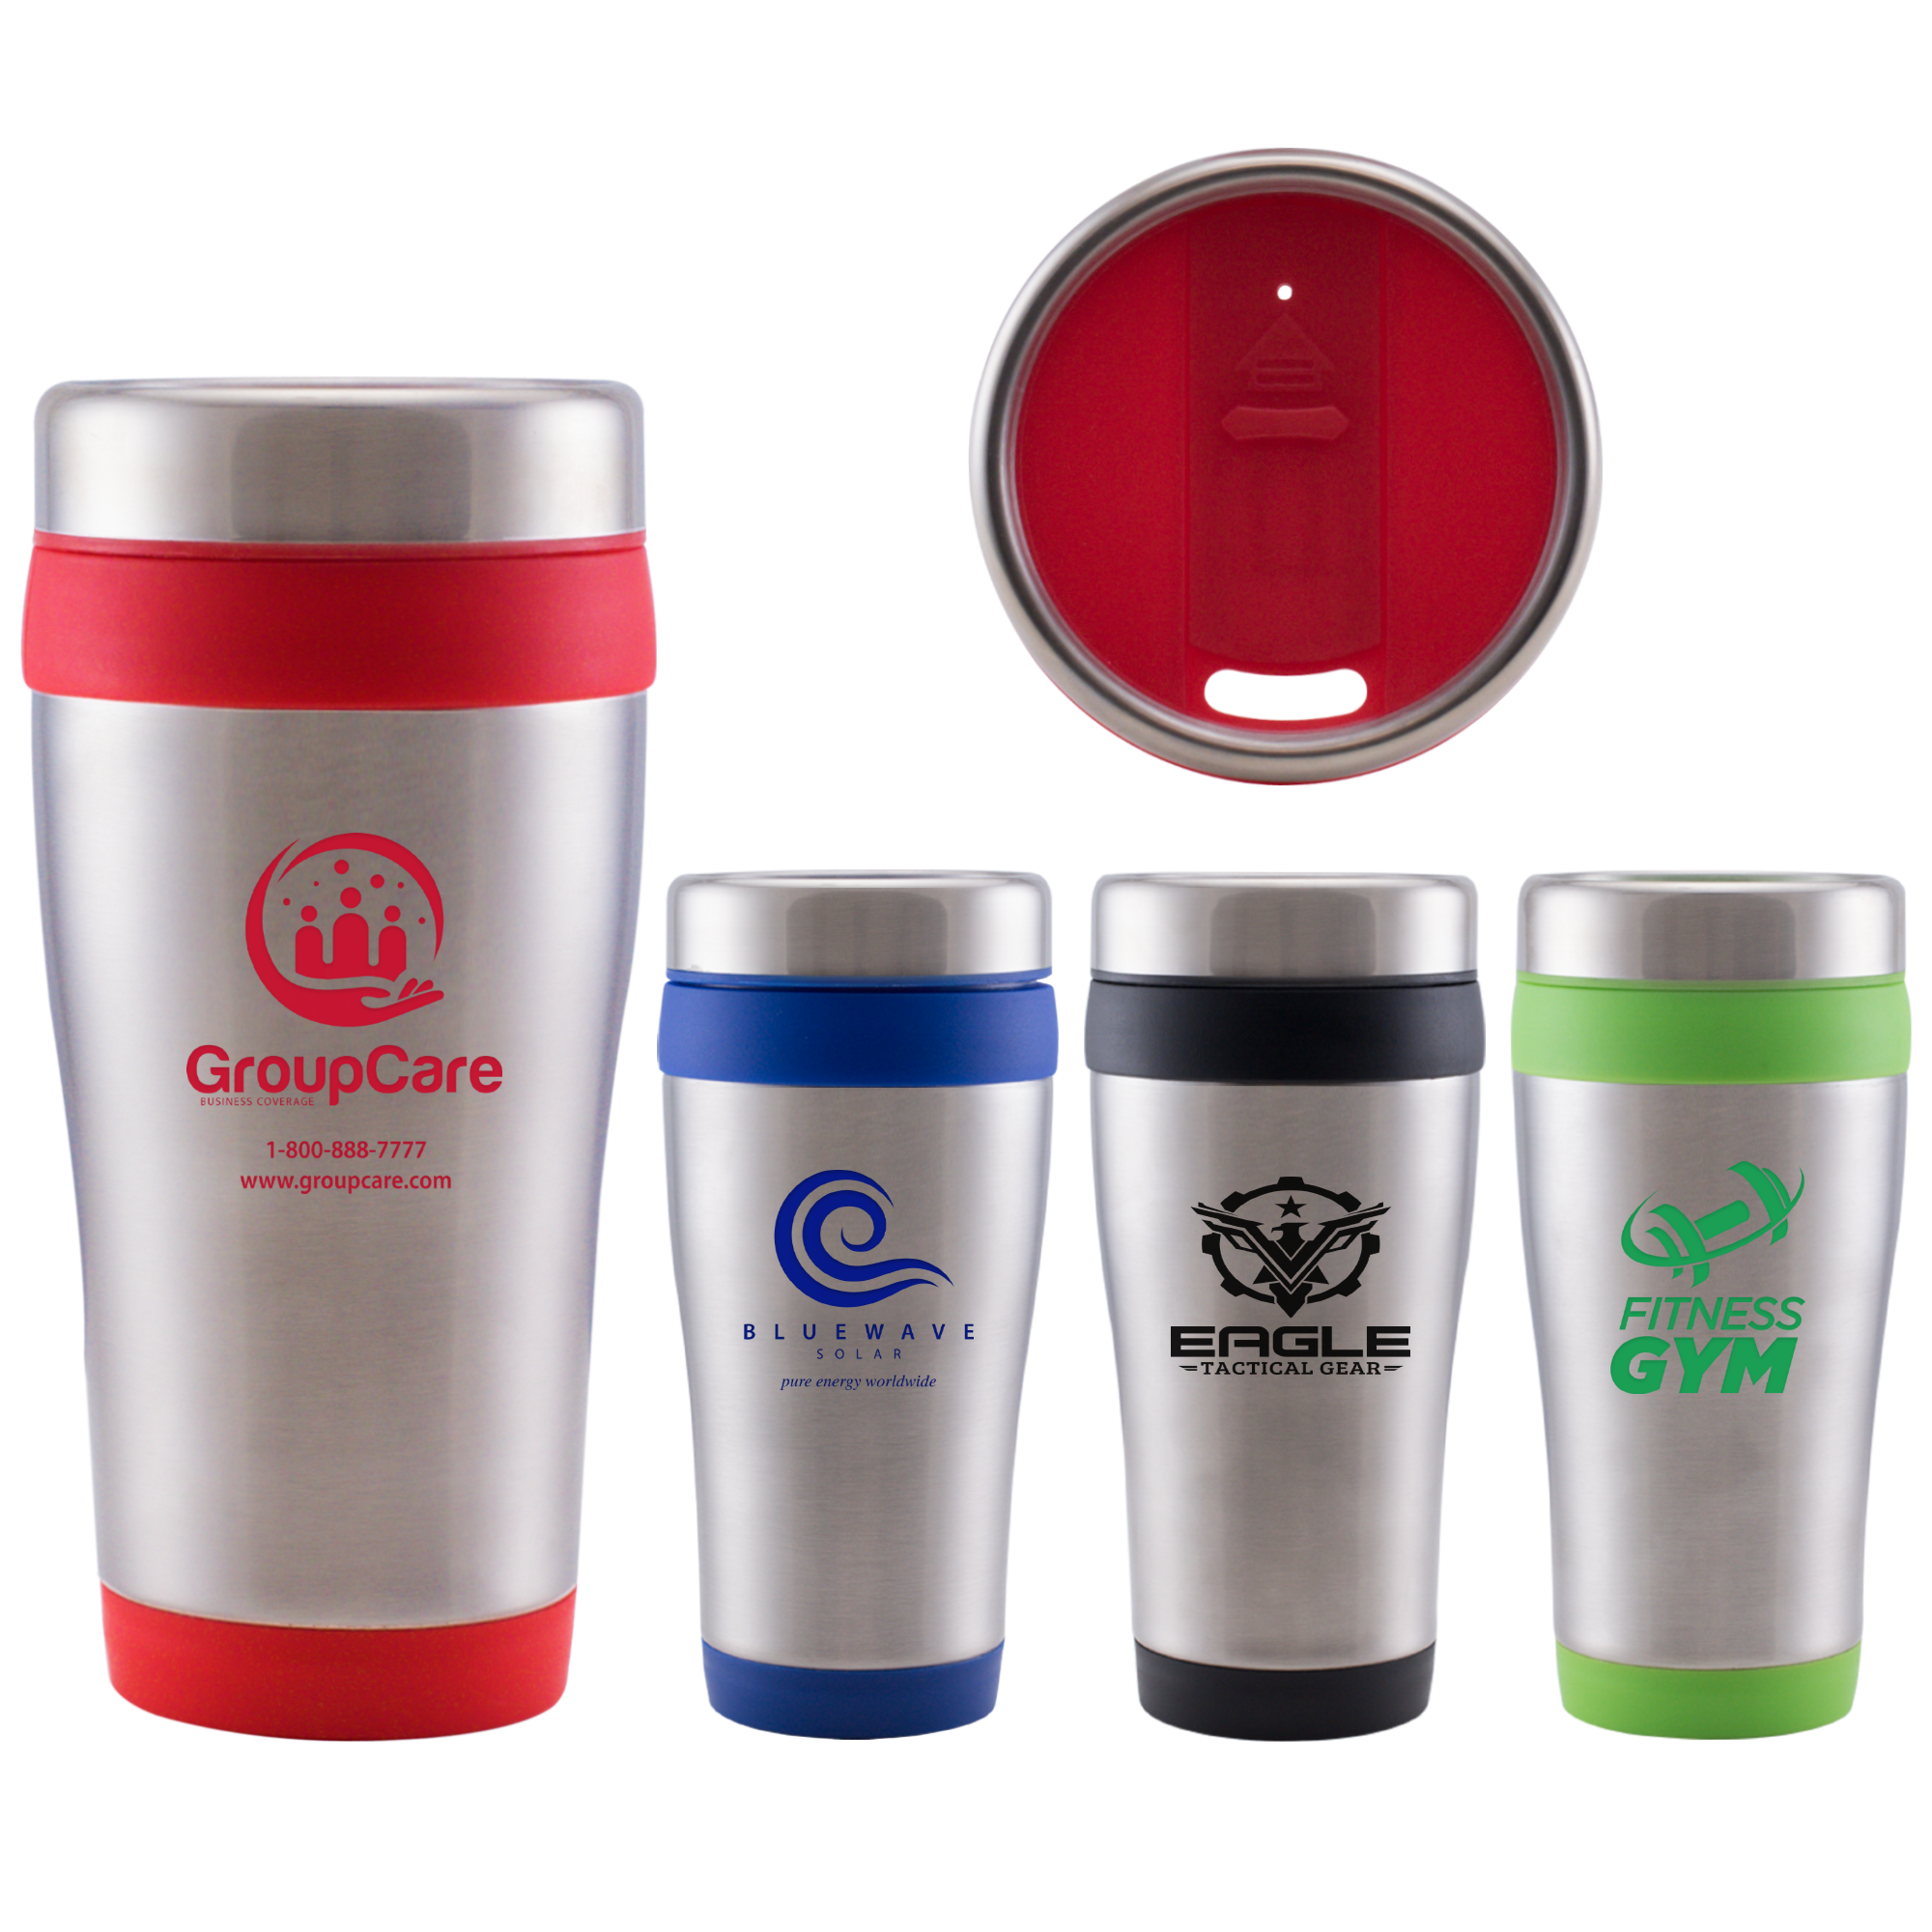 Handcrafted Logo Travel Tumbler with Straw - Thomas Hammer Coffee Roasting  Company